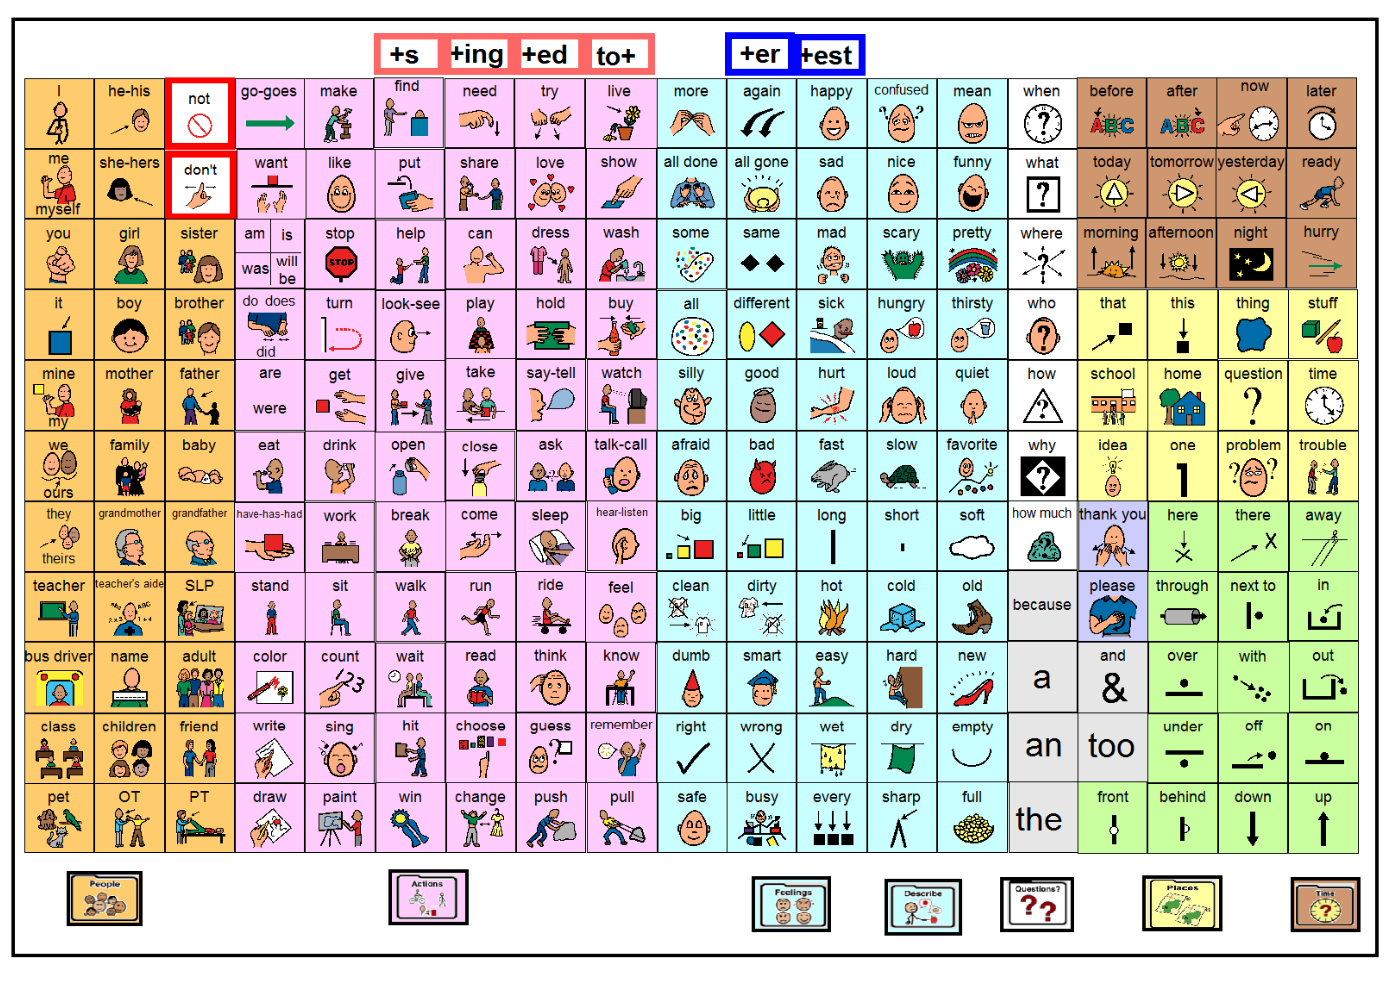 MISD 209 board with 209 core symbols and words, early morphemes, color-coding, folders of categories